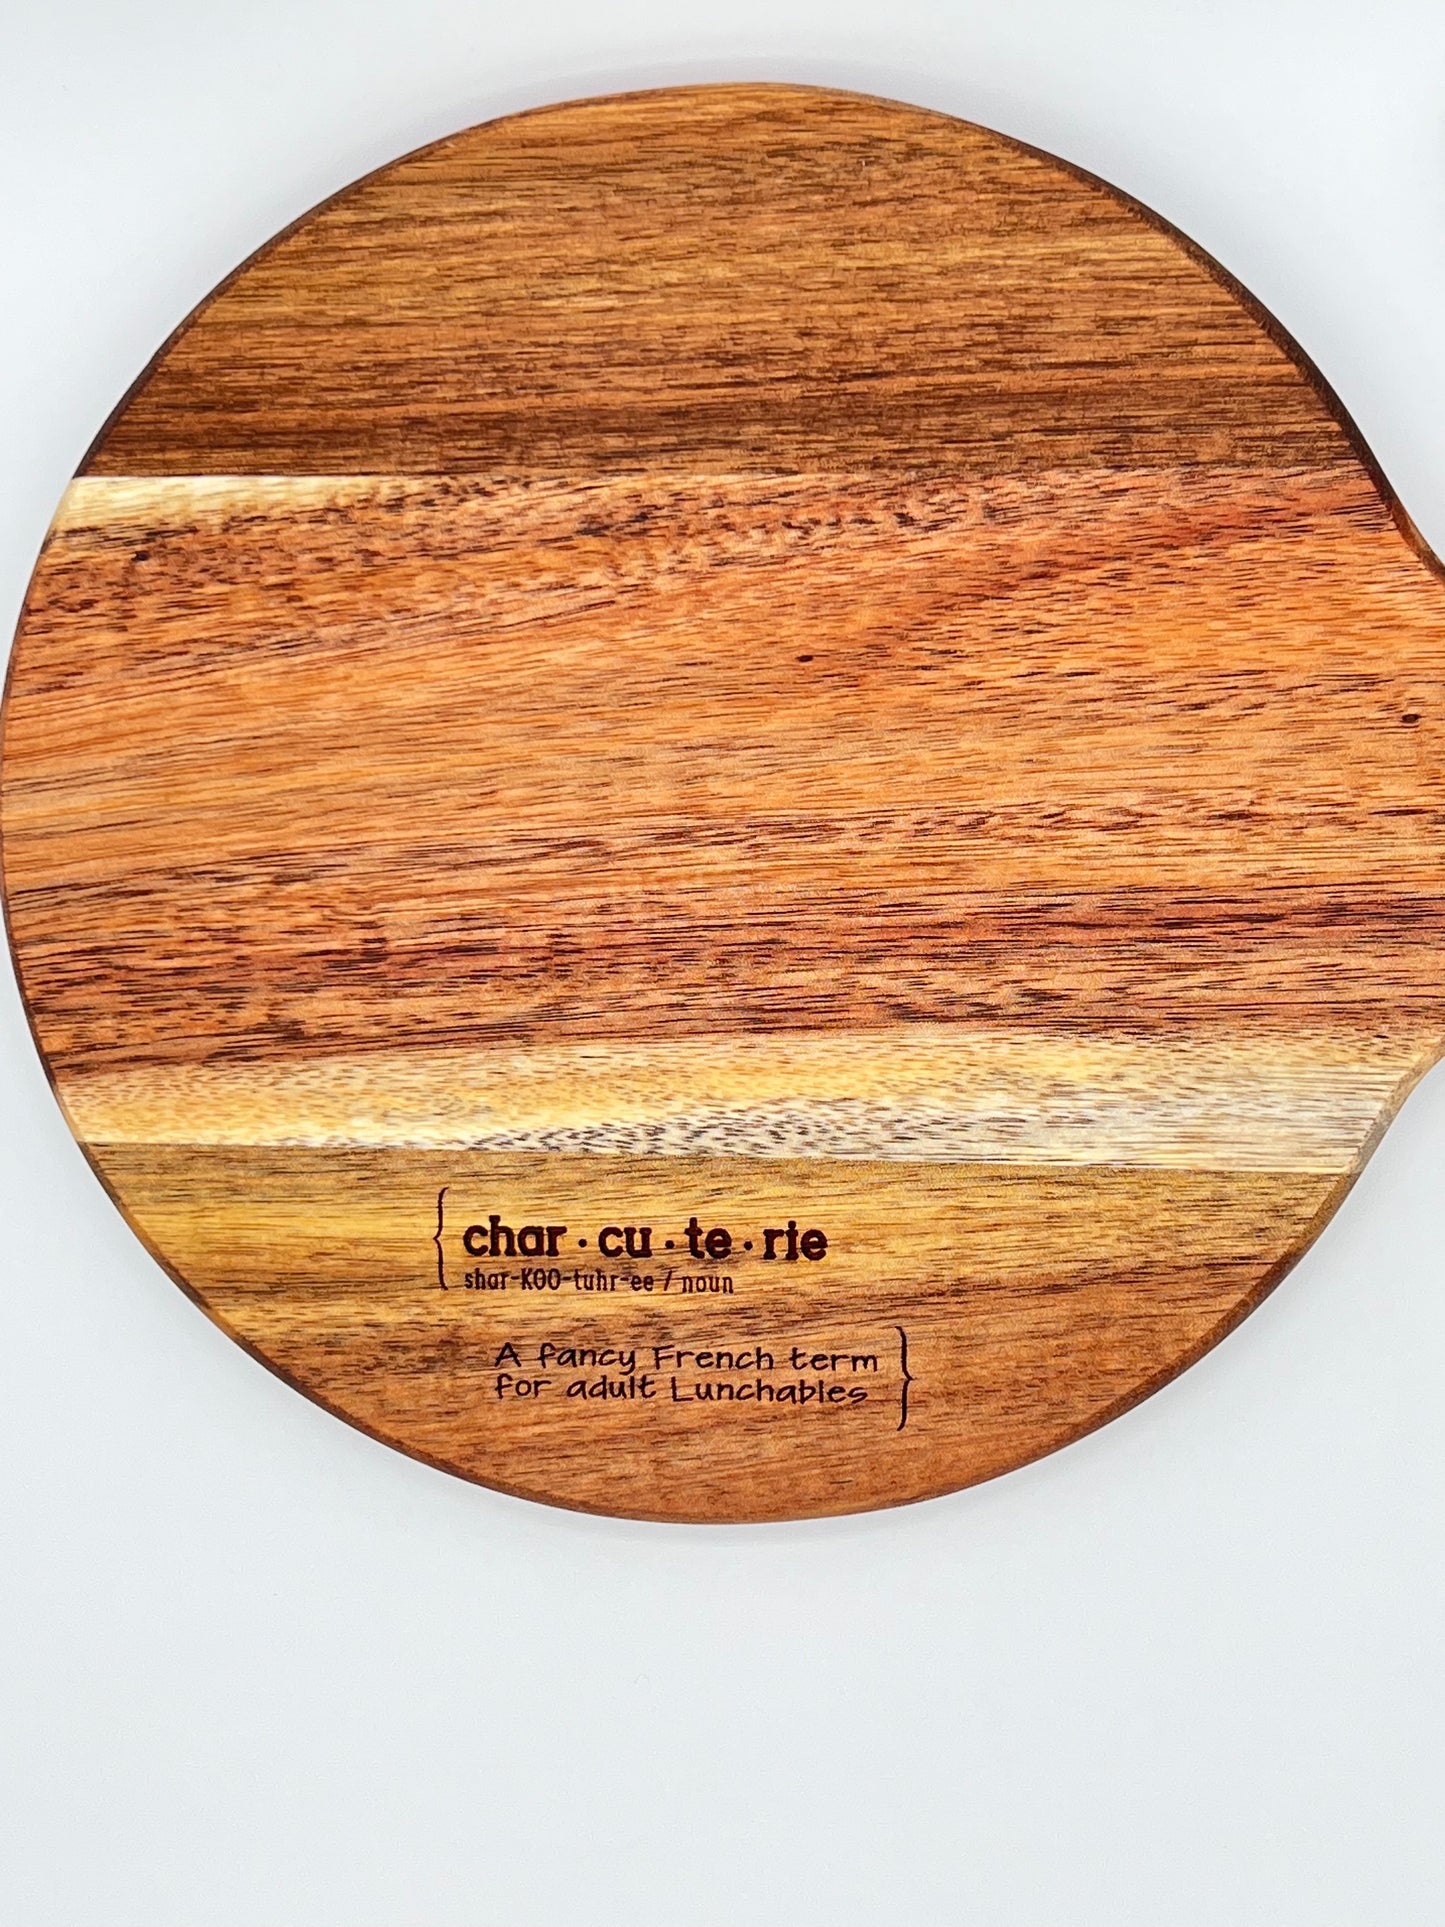 Charcuterie Meaning Engraved on Acacia Board